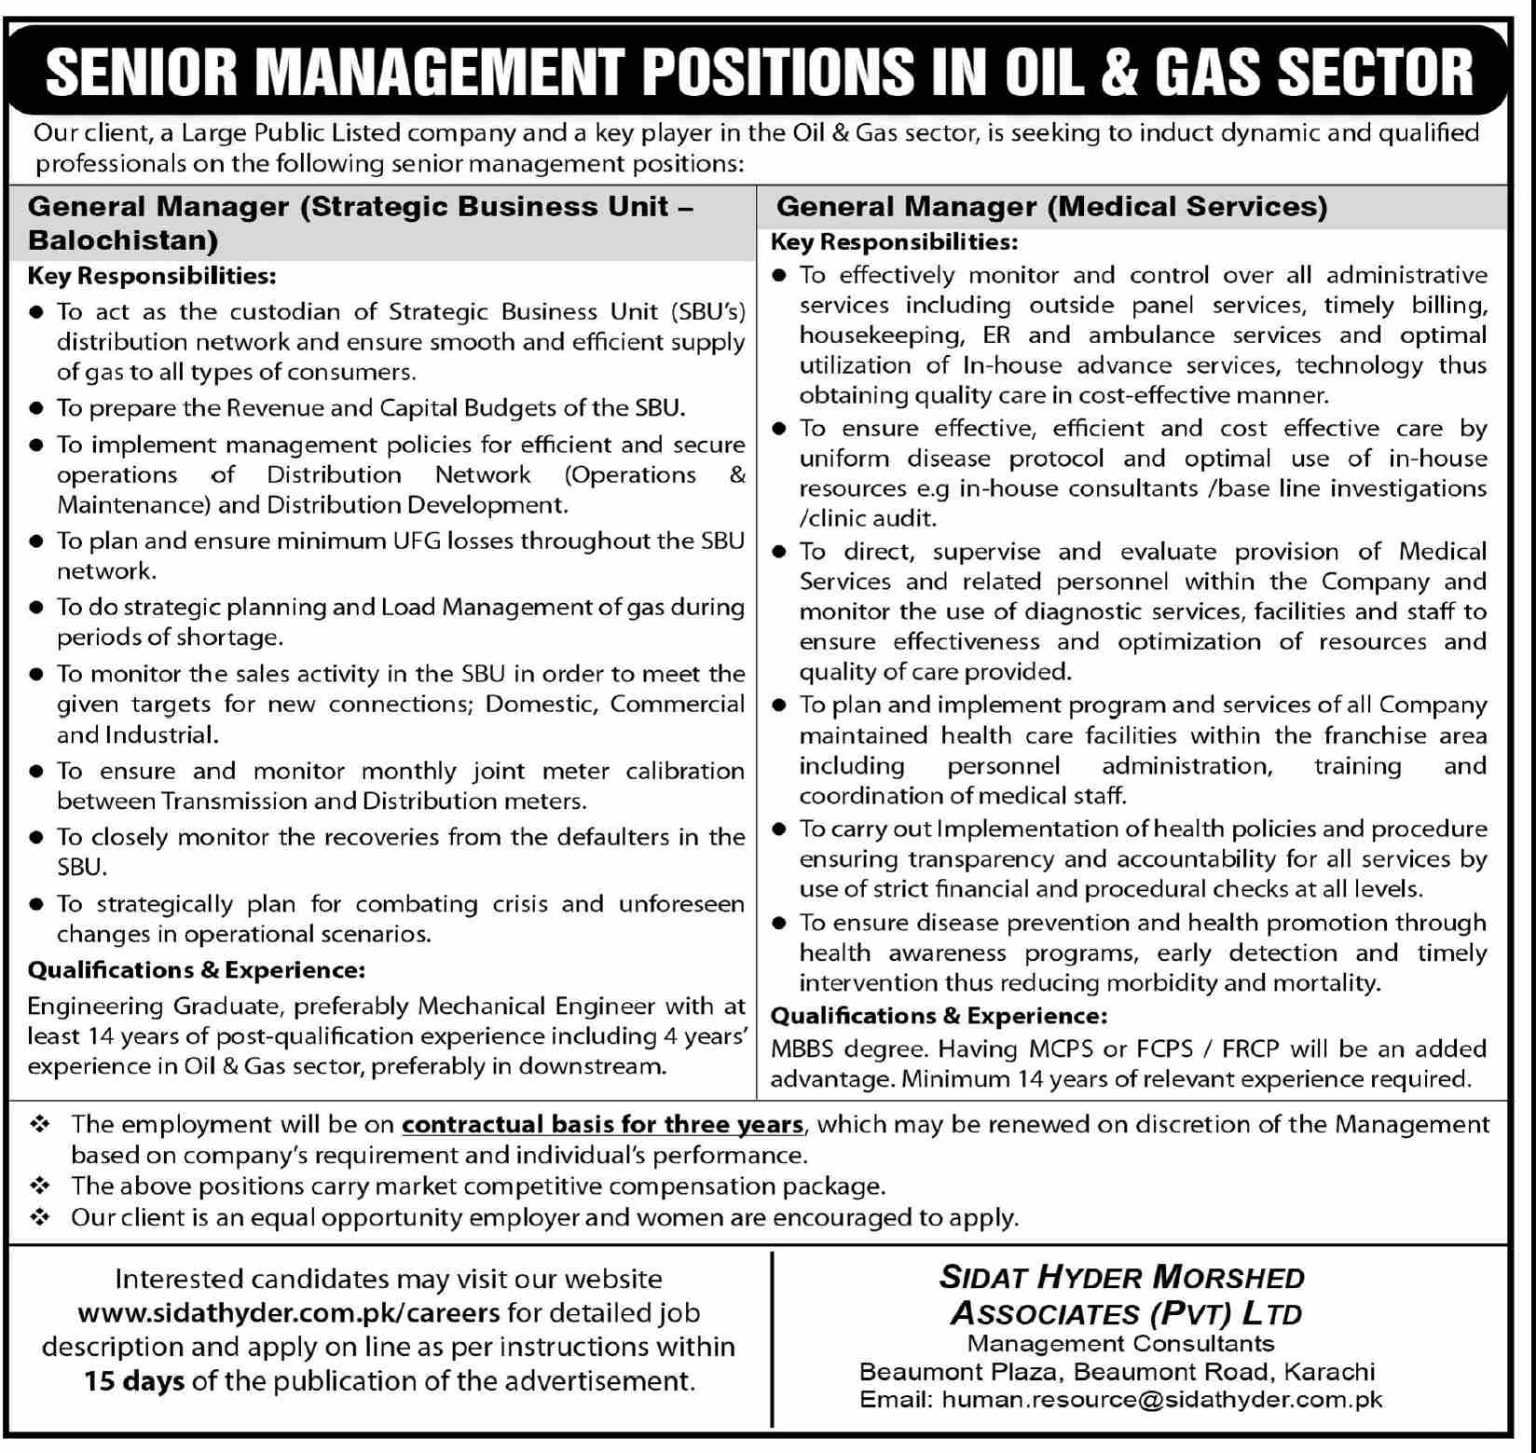 Jobs in Oil & Gas Sector 2022